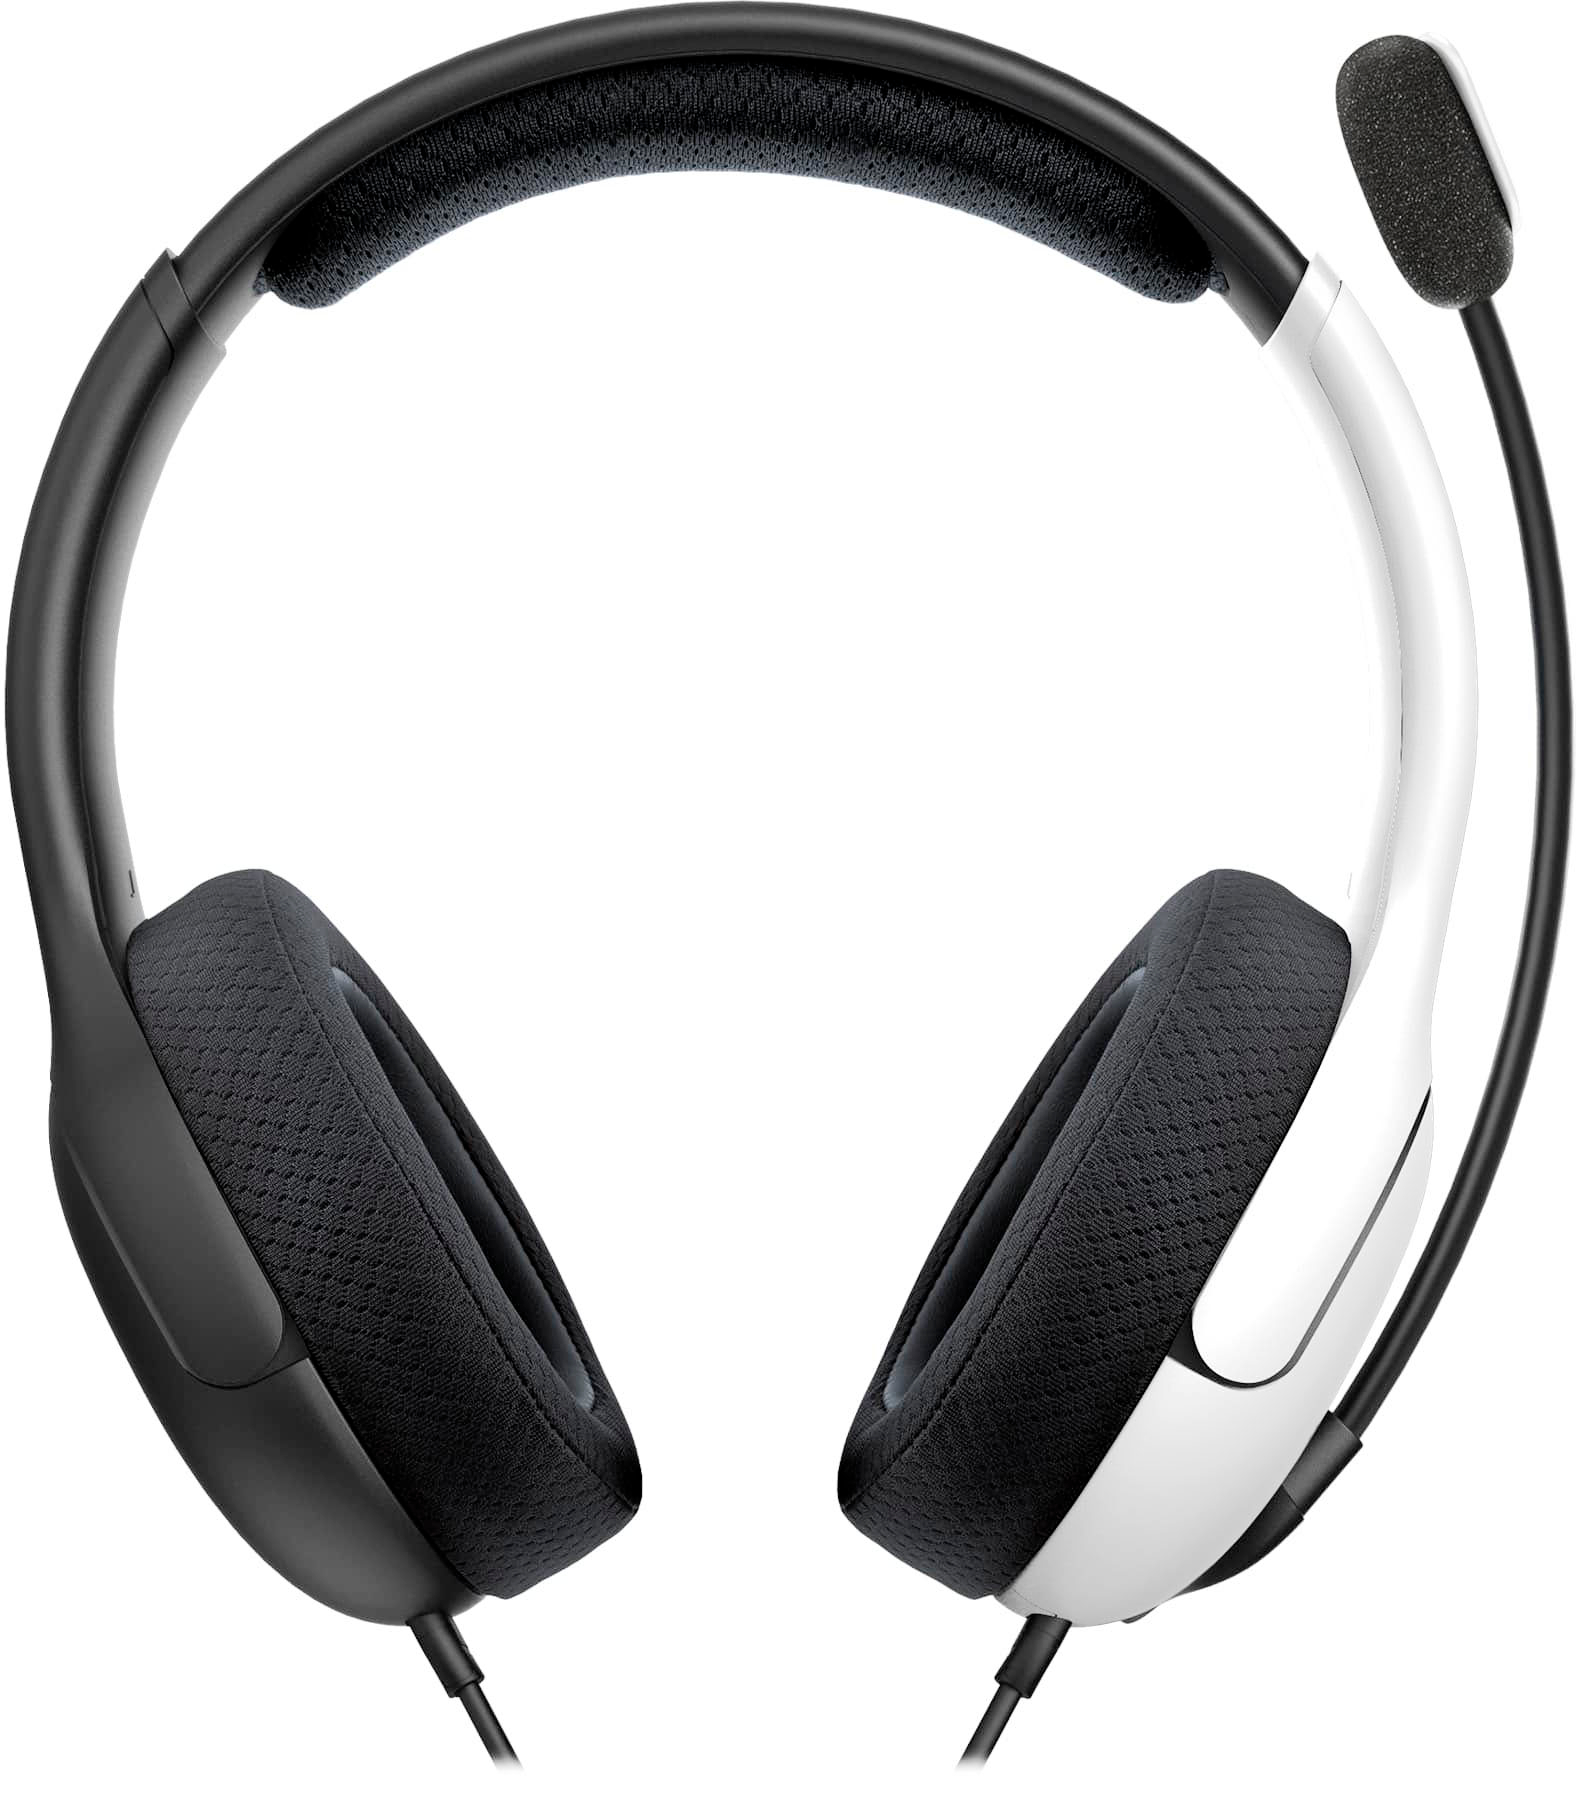 PDP Gaming Lvl40 Wired Stereo Headset for Nintendo Switch (Black & White)